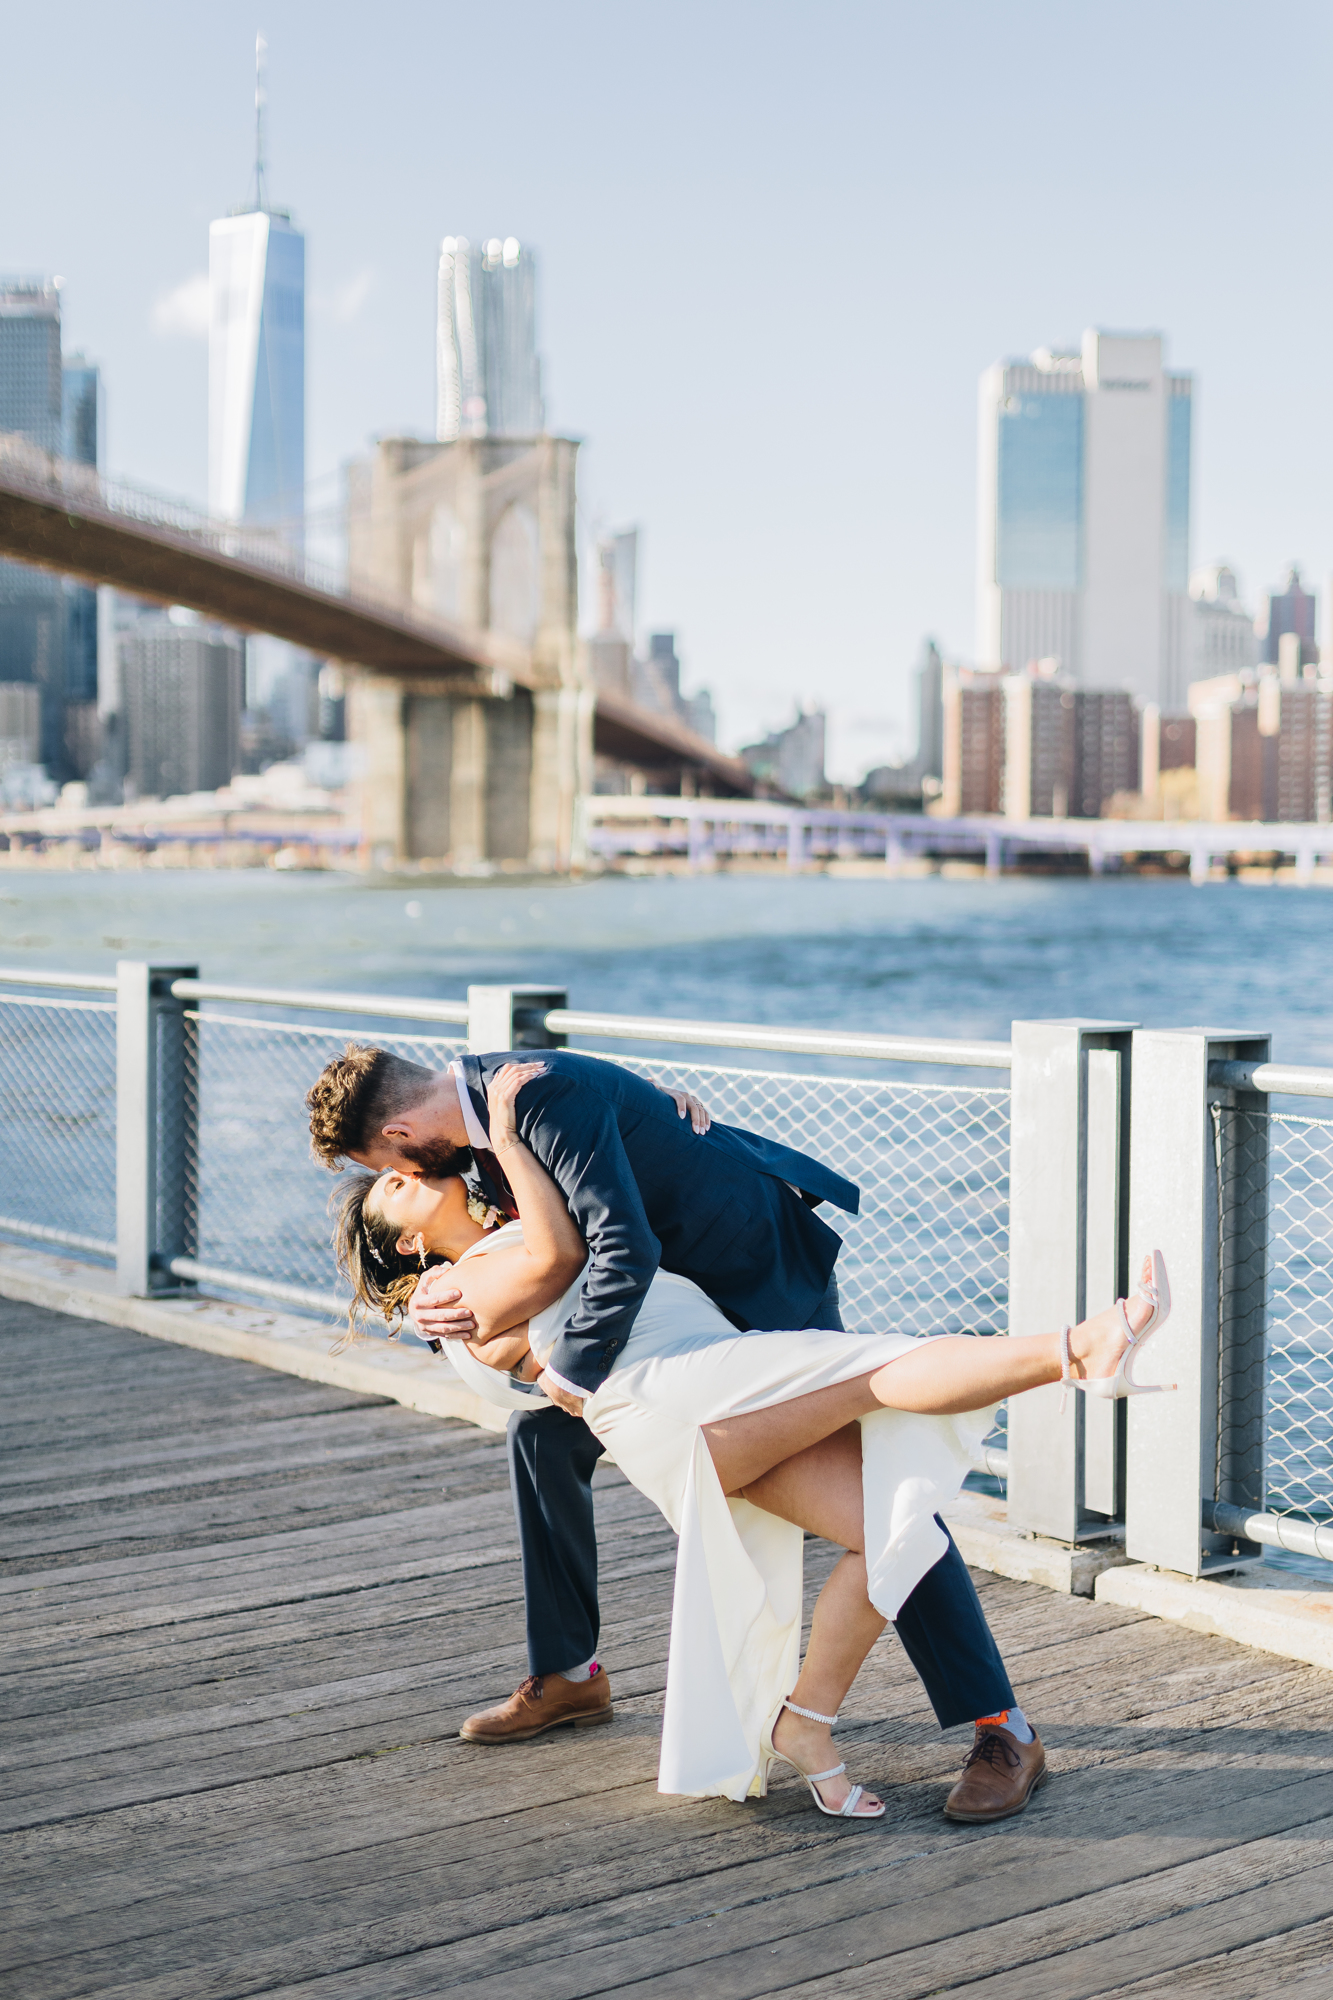 Pretty Fall DUMBO Elopement with New York views and foliage